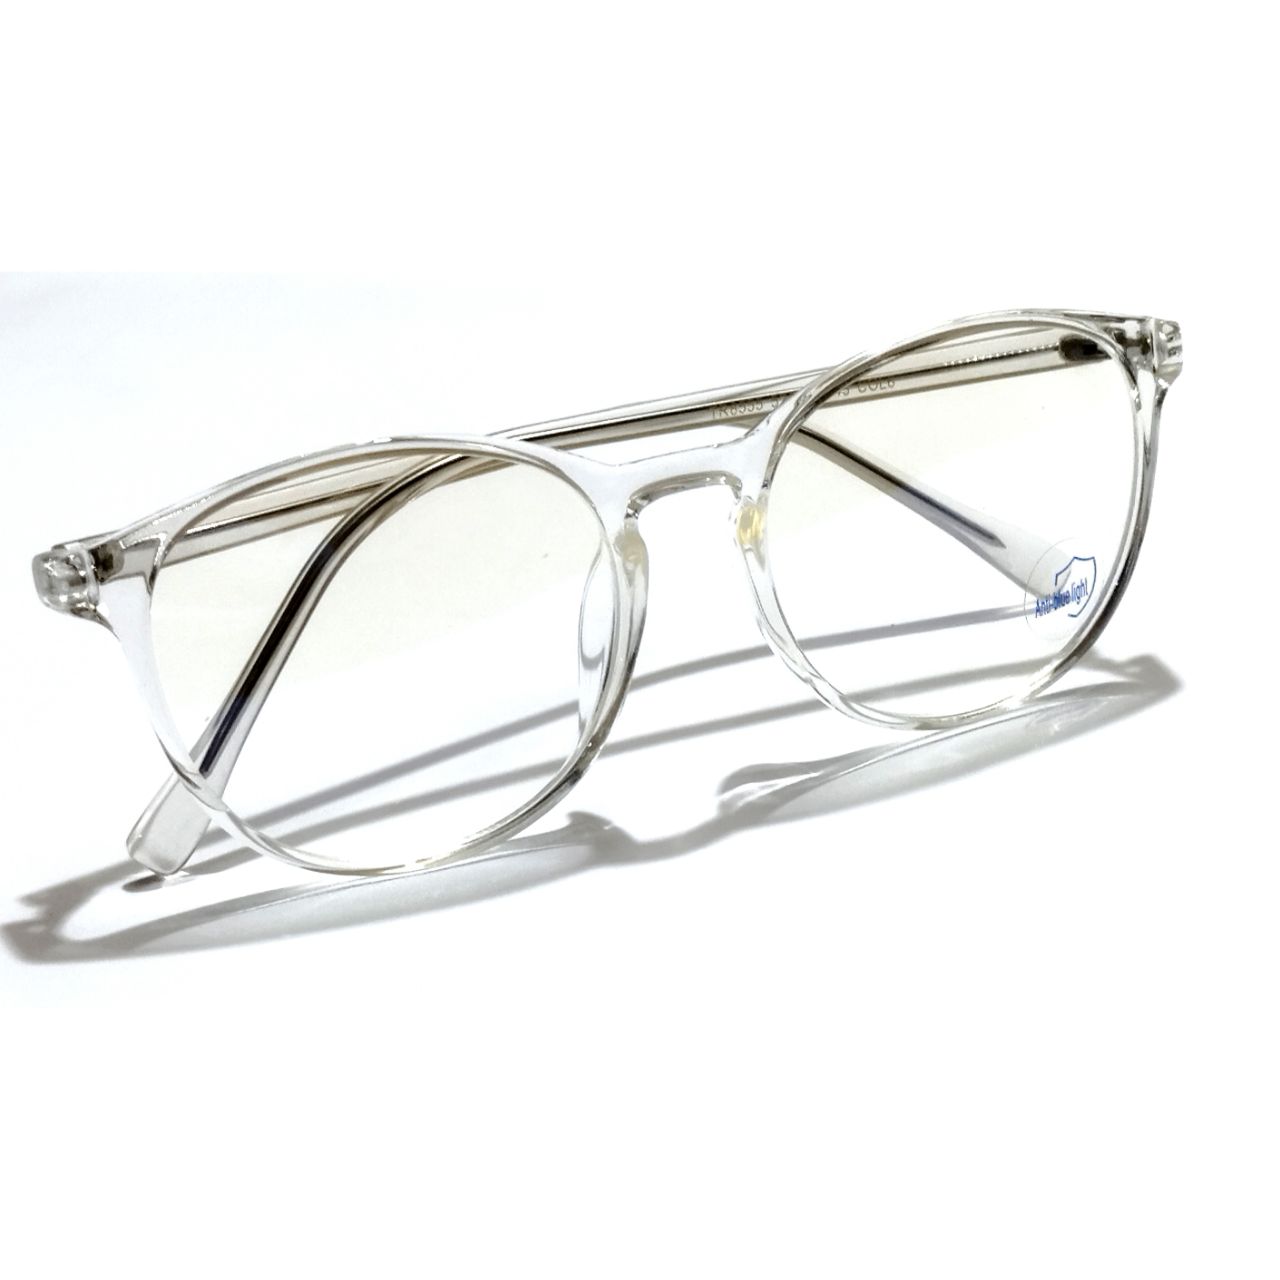 Luxury Clear Round Transparent Glasses for Men and Women M8555 C6